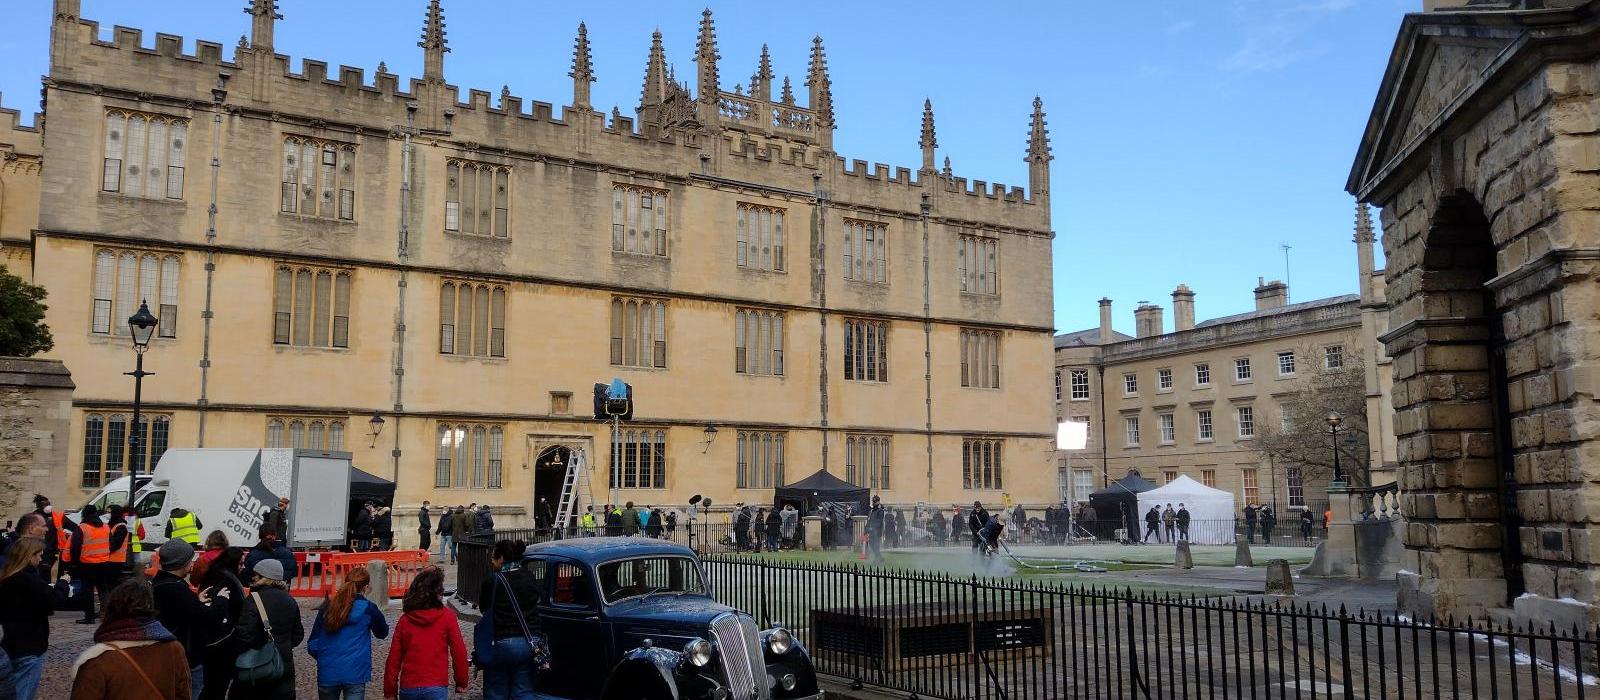 Filming in Radcliffe Square